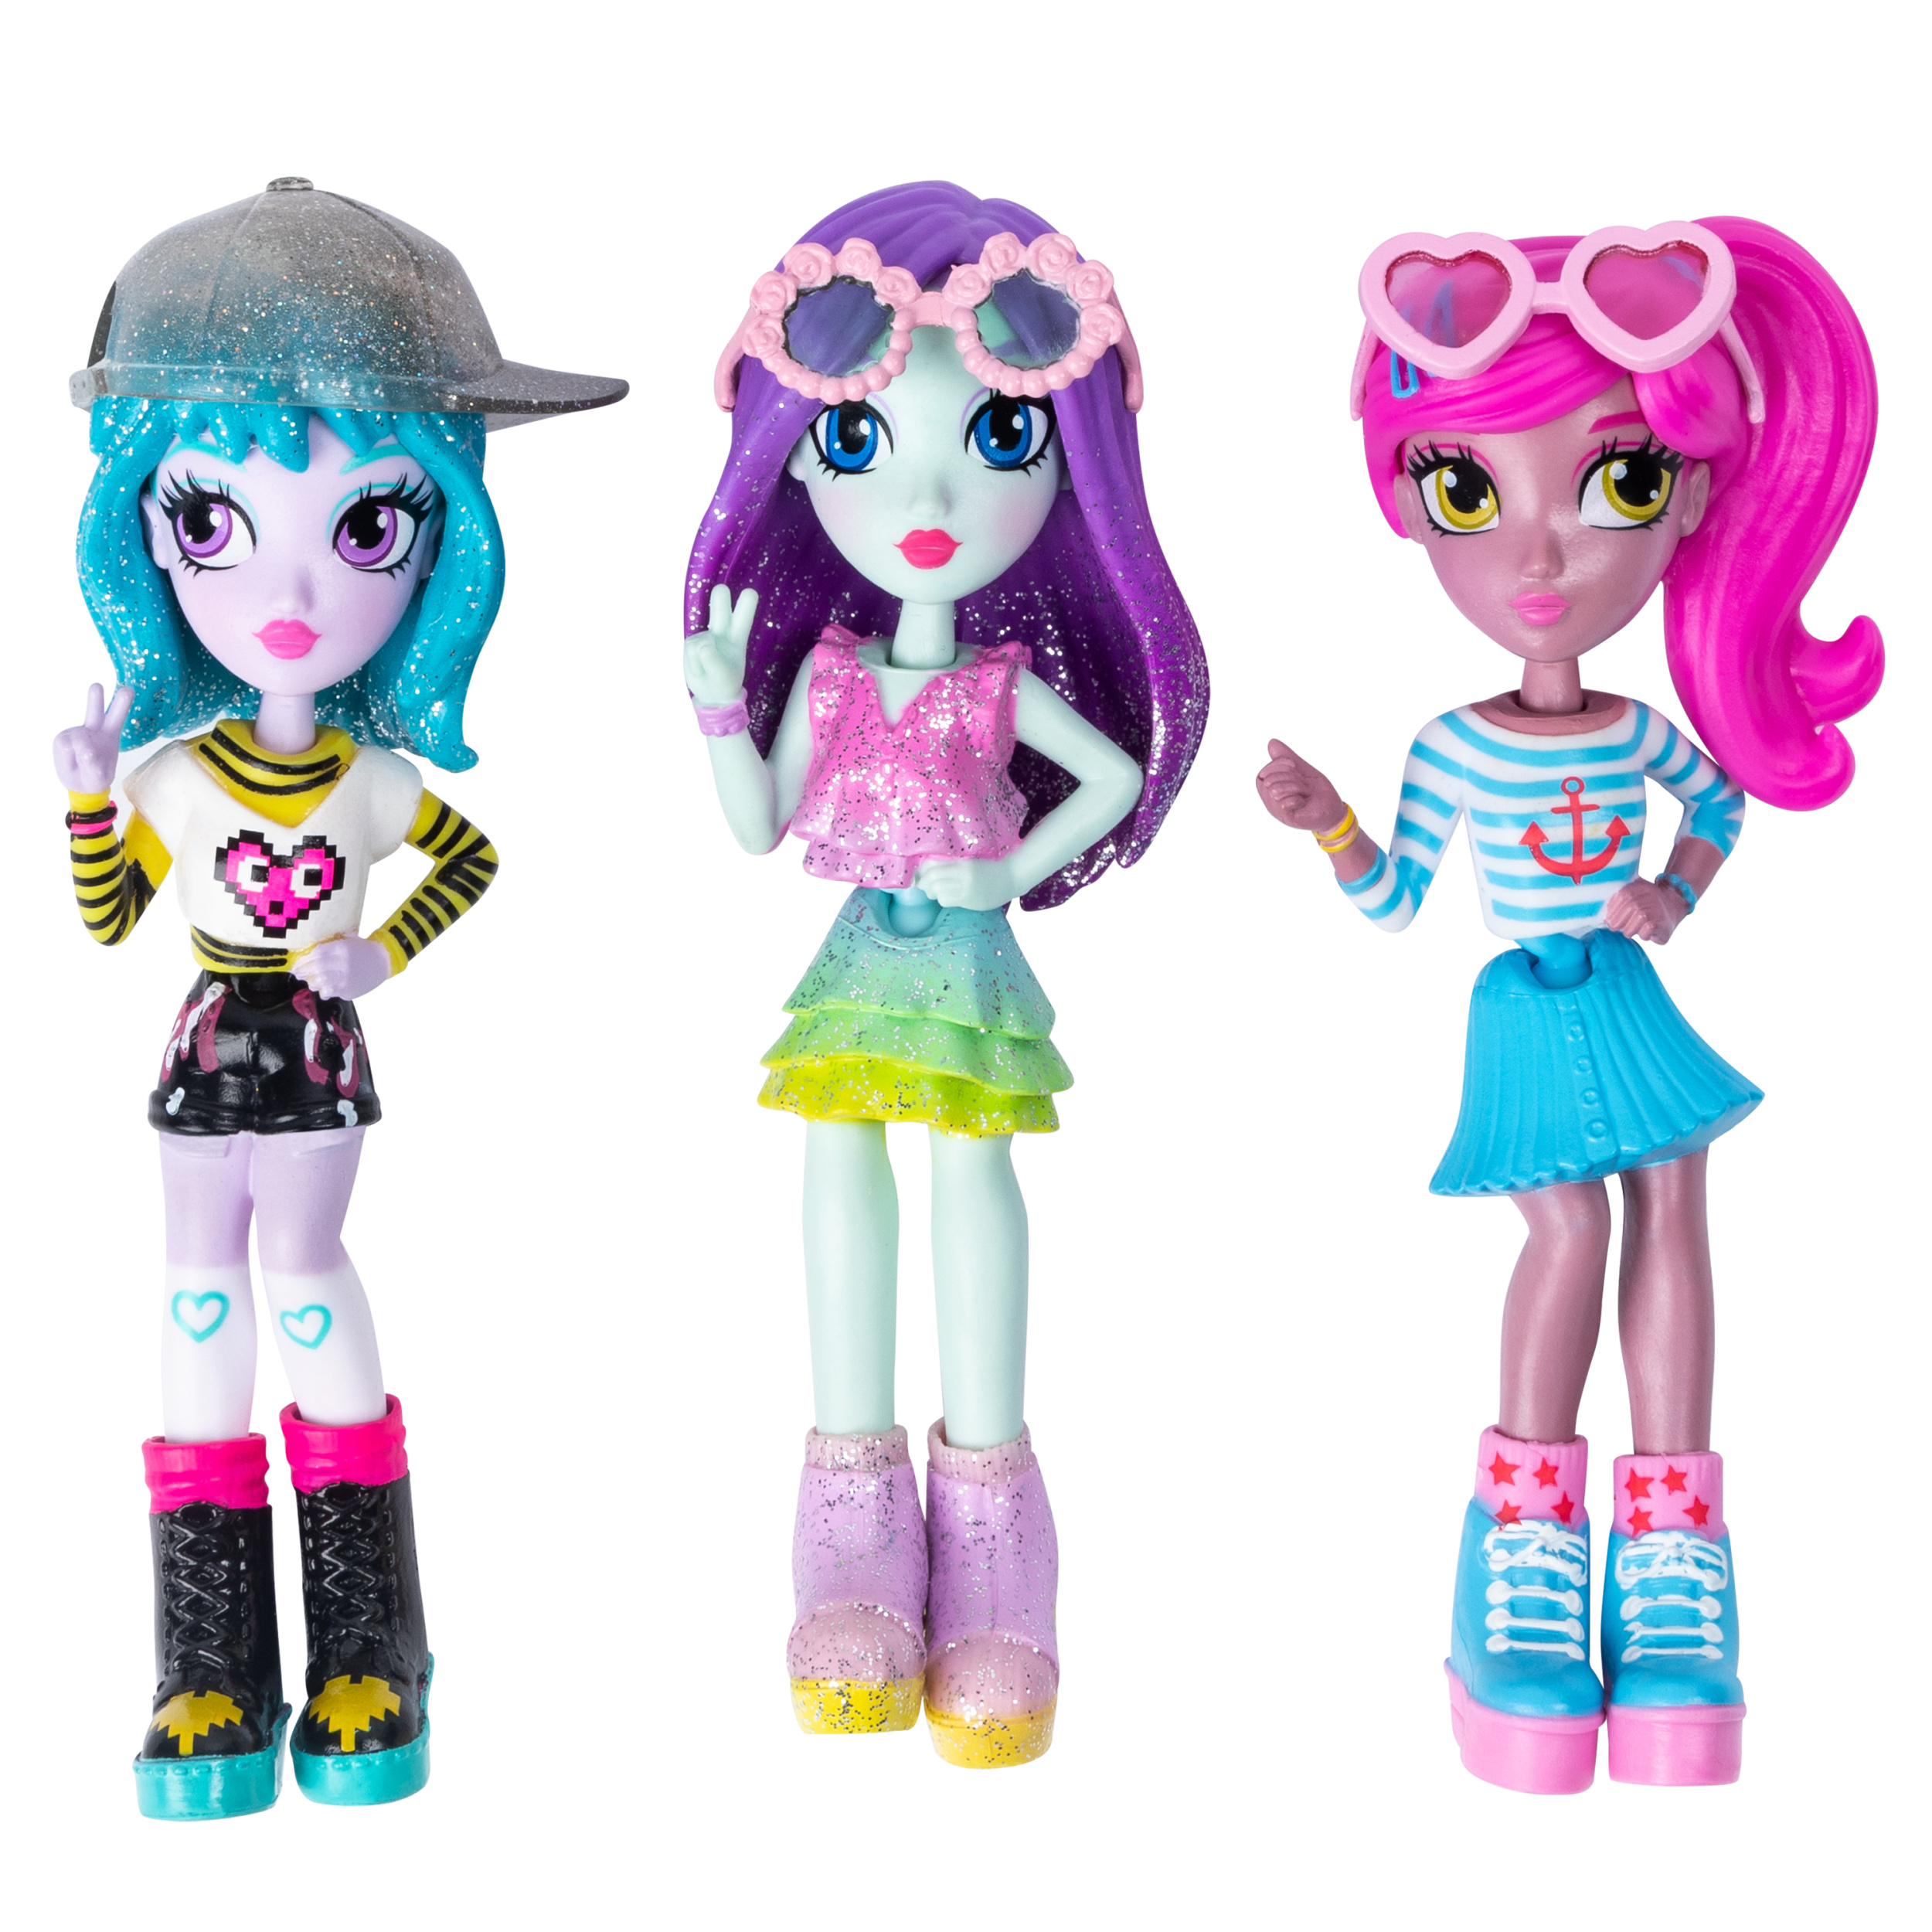 Off the Hook Style Doll 3 Pack - image 1 of 8